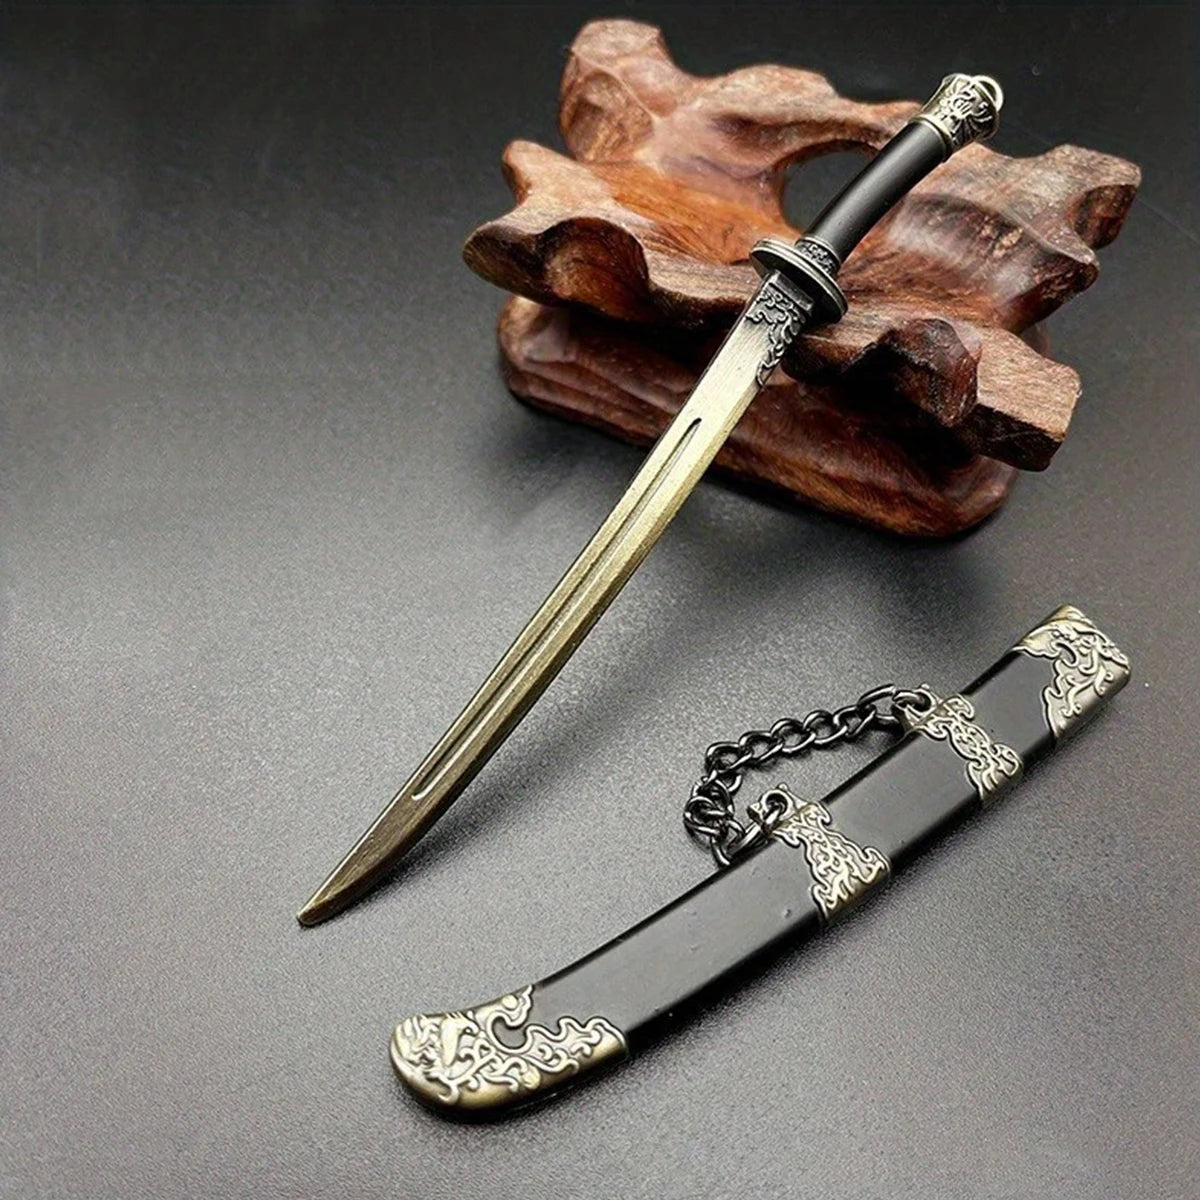 Ancient Chinese Mini Sword KeyChain First Emperor of Qin KeyRing Sword Metal Weapon Toy Key Chain Pendant Cute Keychain 5